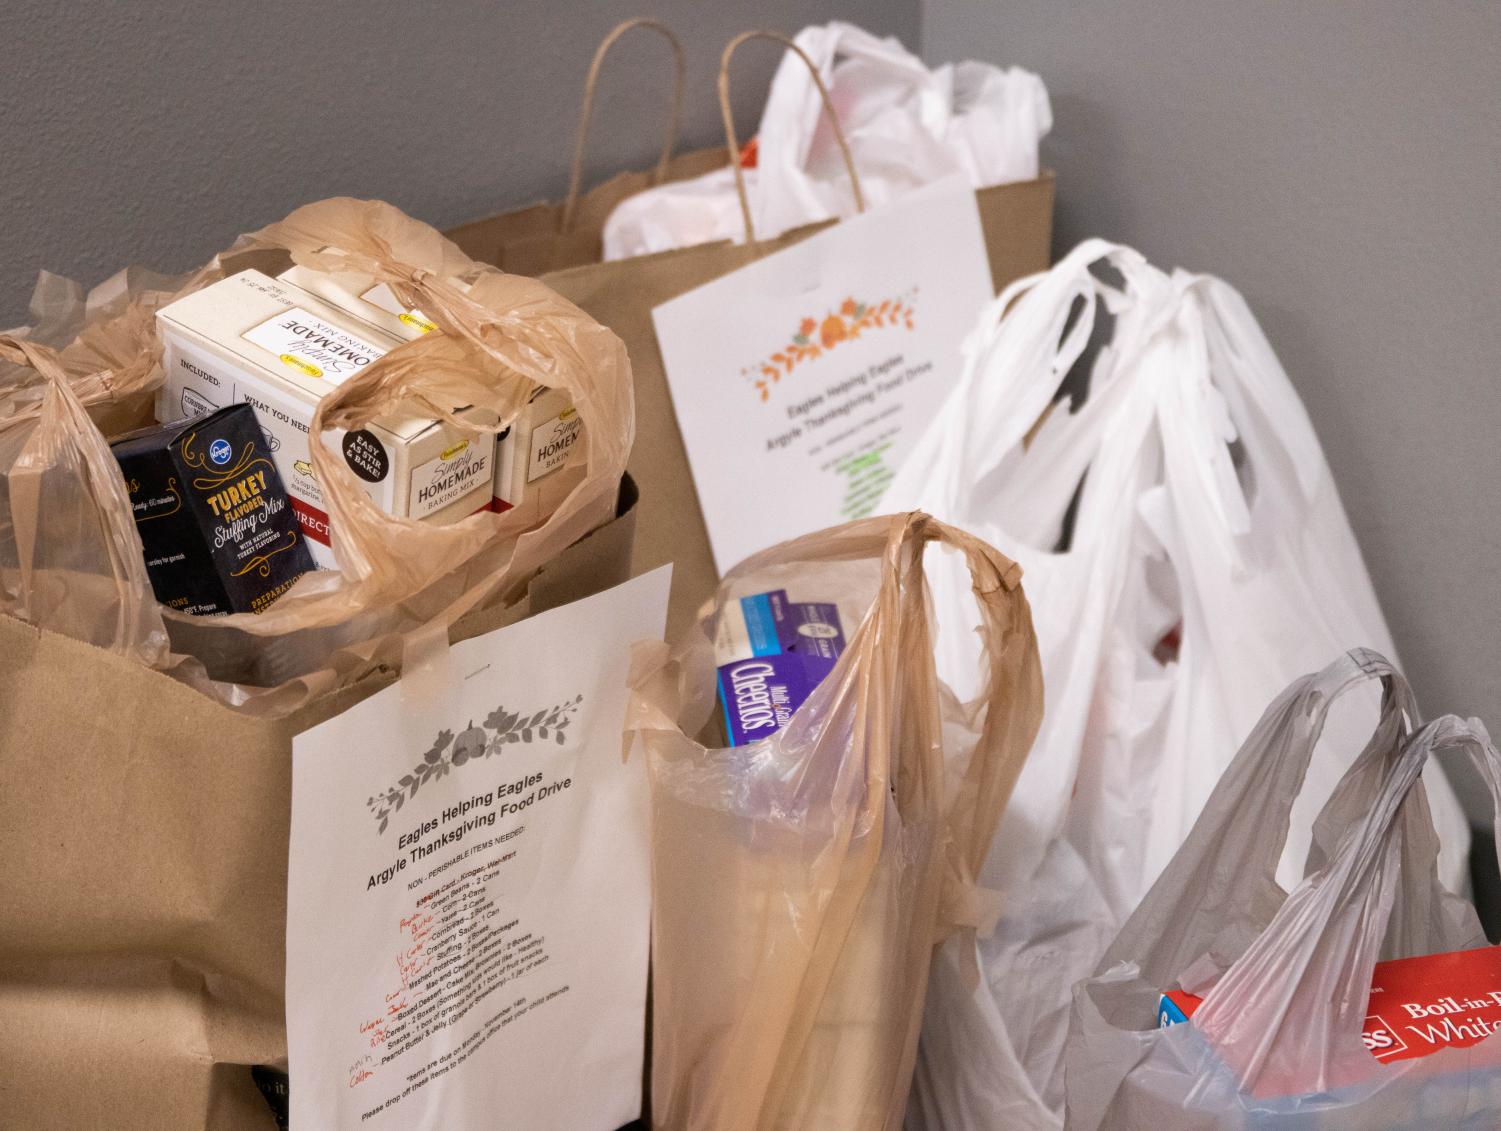 Thanksgiving Bags to Donate – Open Table